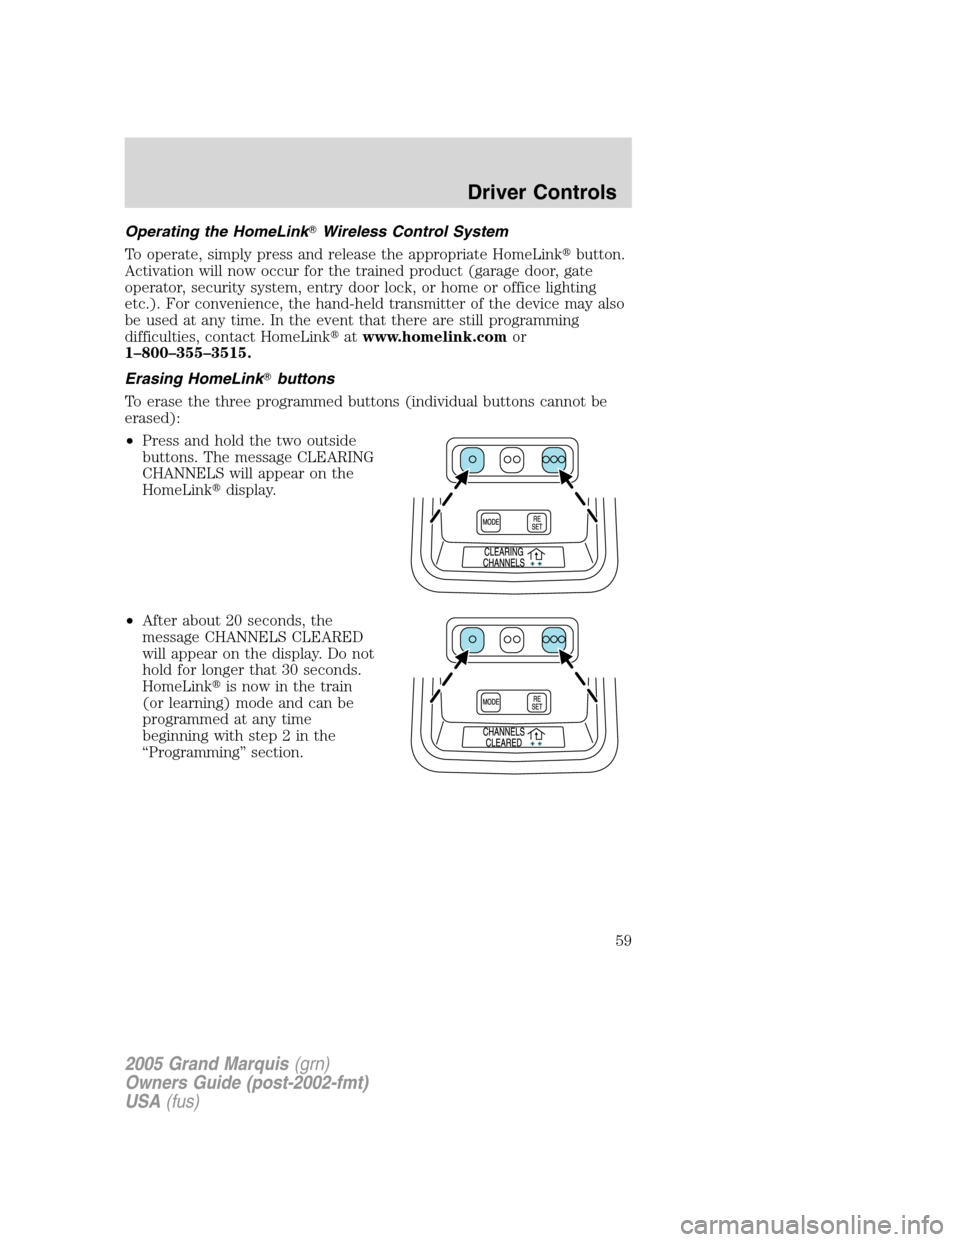 Mercury Grand Marquis 2005  Owners Manuals Operating the HomeLinkWireless Control System
To operate, simply press and release the appropriate HomeLinkbutton.
Activation will now occur for the trained product (garage door, gate
operator, secu